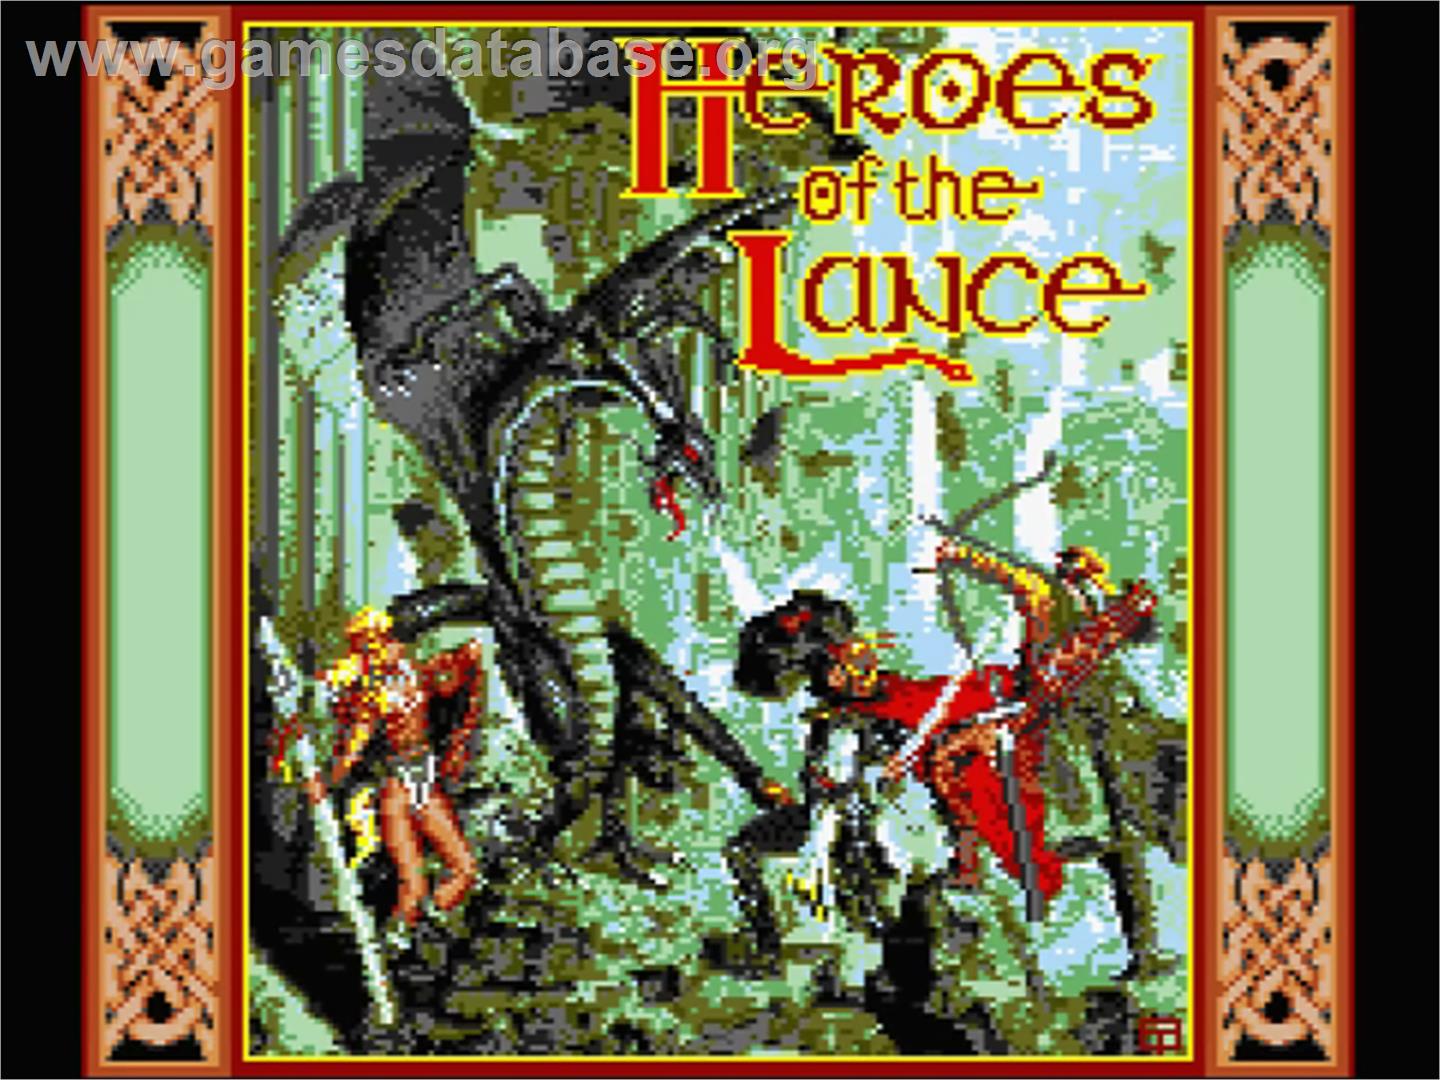 Heroes of the Lance - MSX 2 - Artwork - Title Screen